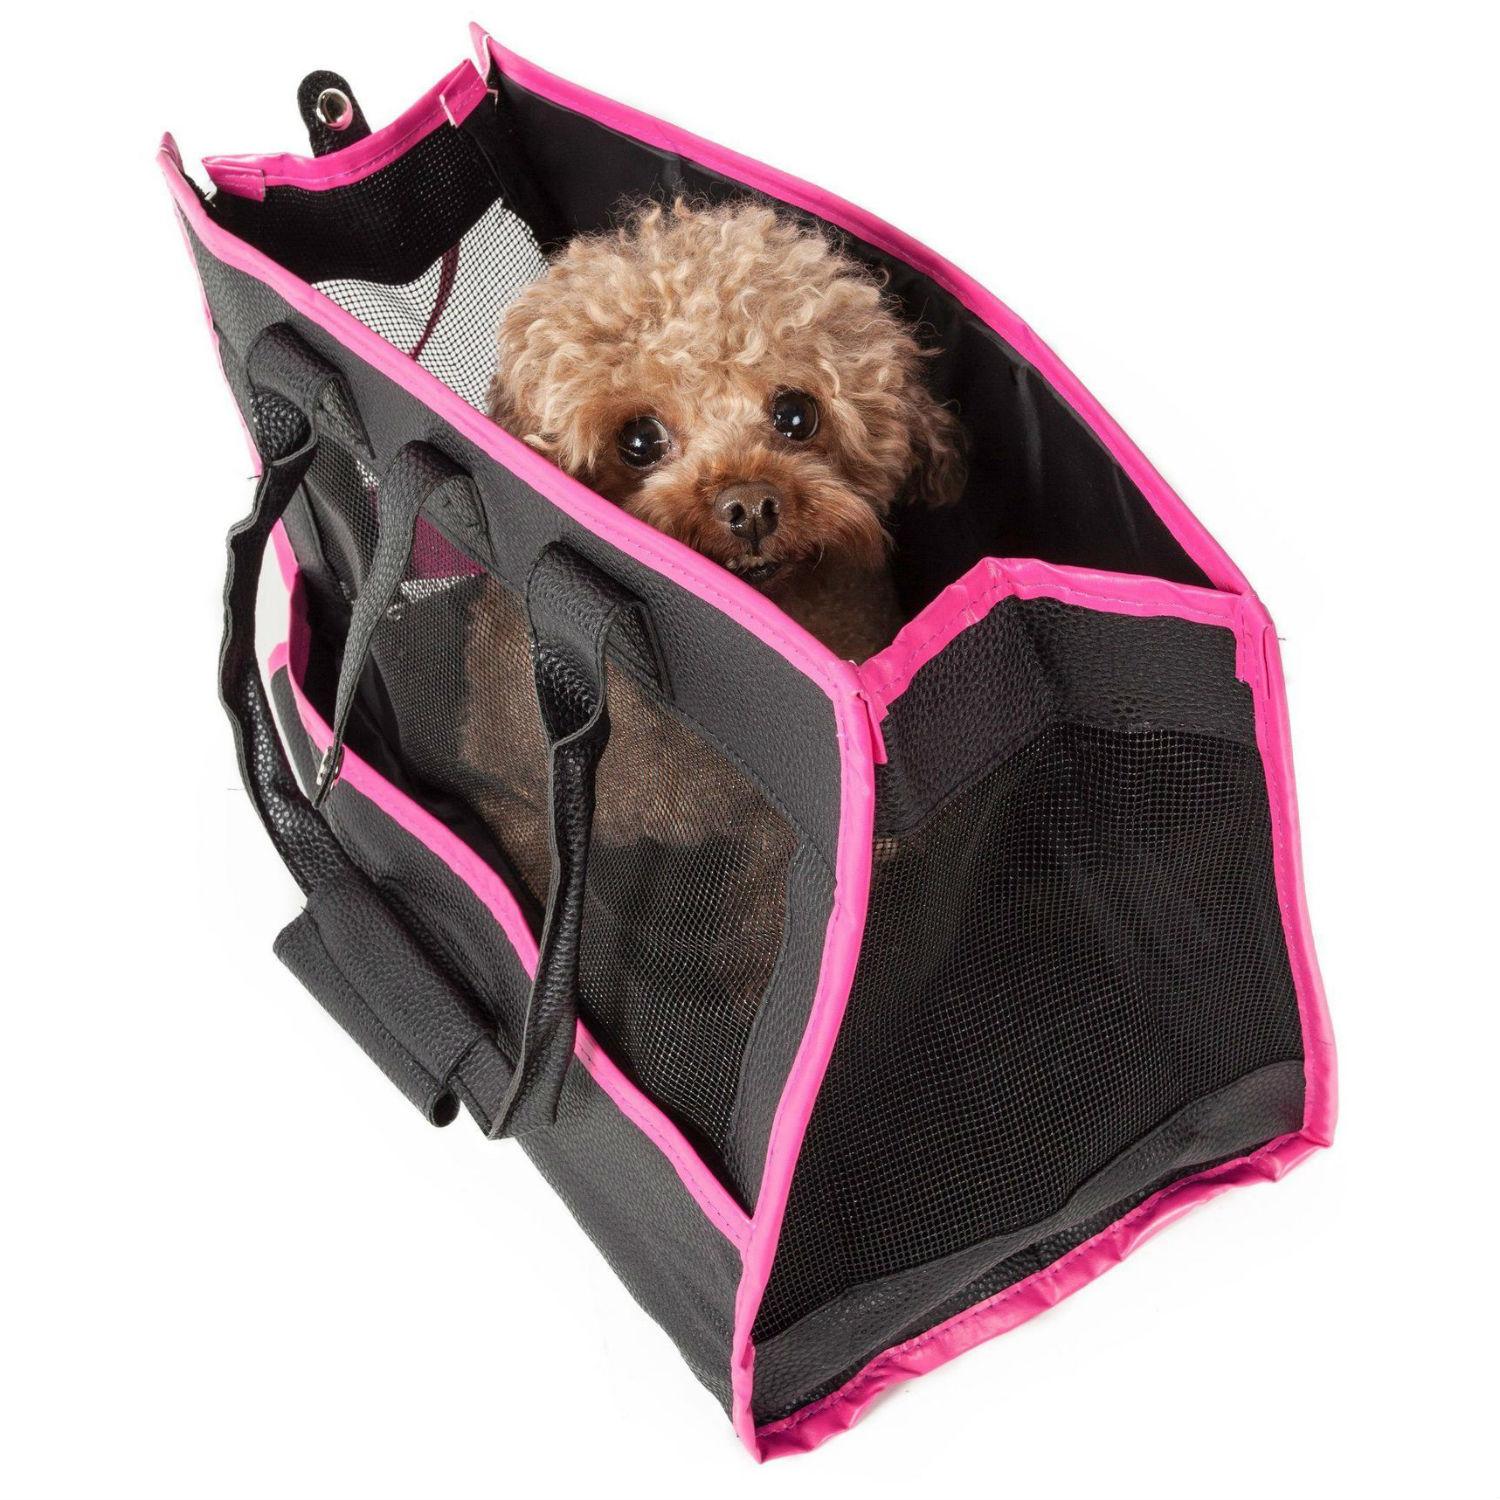 https://images.baxterboo.com/global/images/products/large/pet-life-posh-paw-dog-carrier-tote-black-pink-6376.jpg